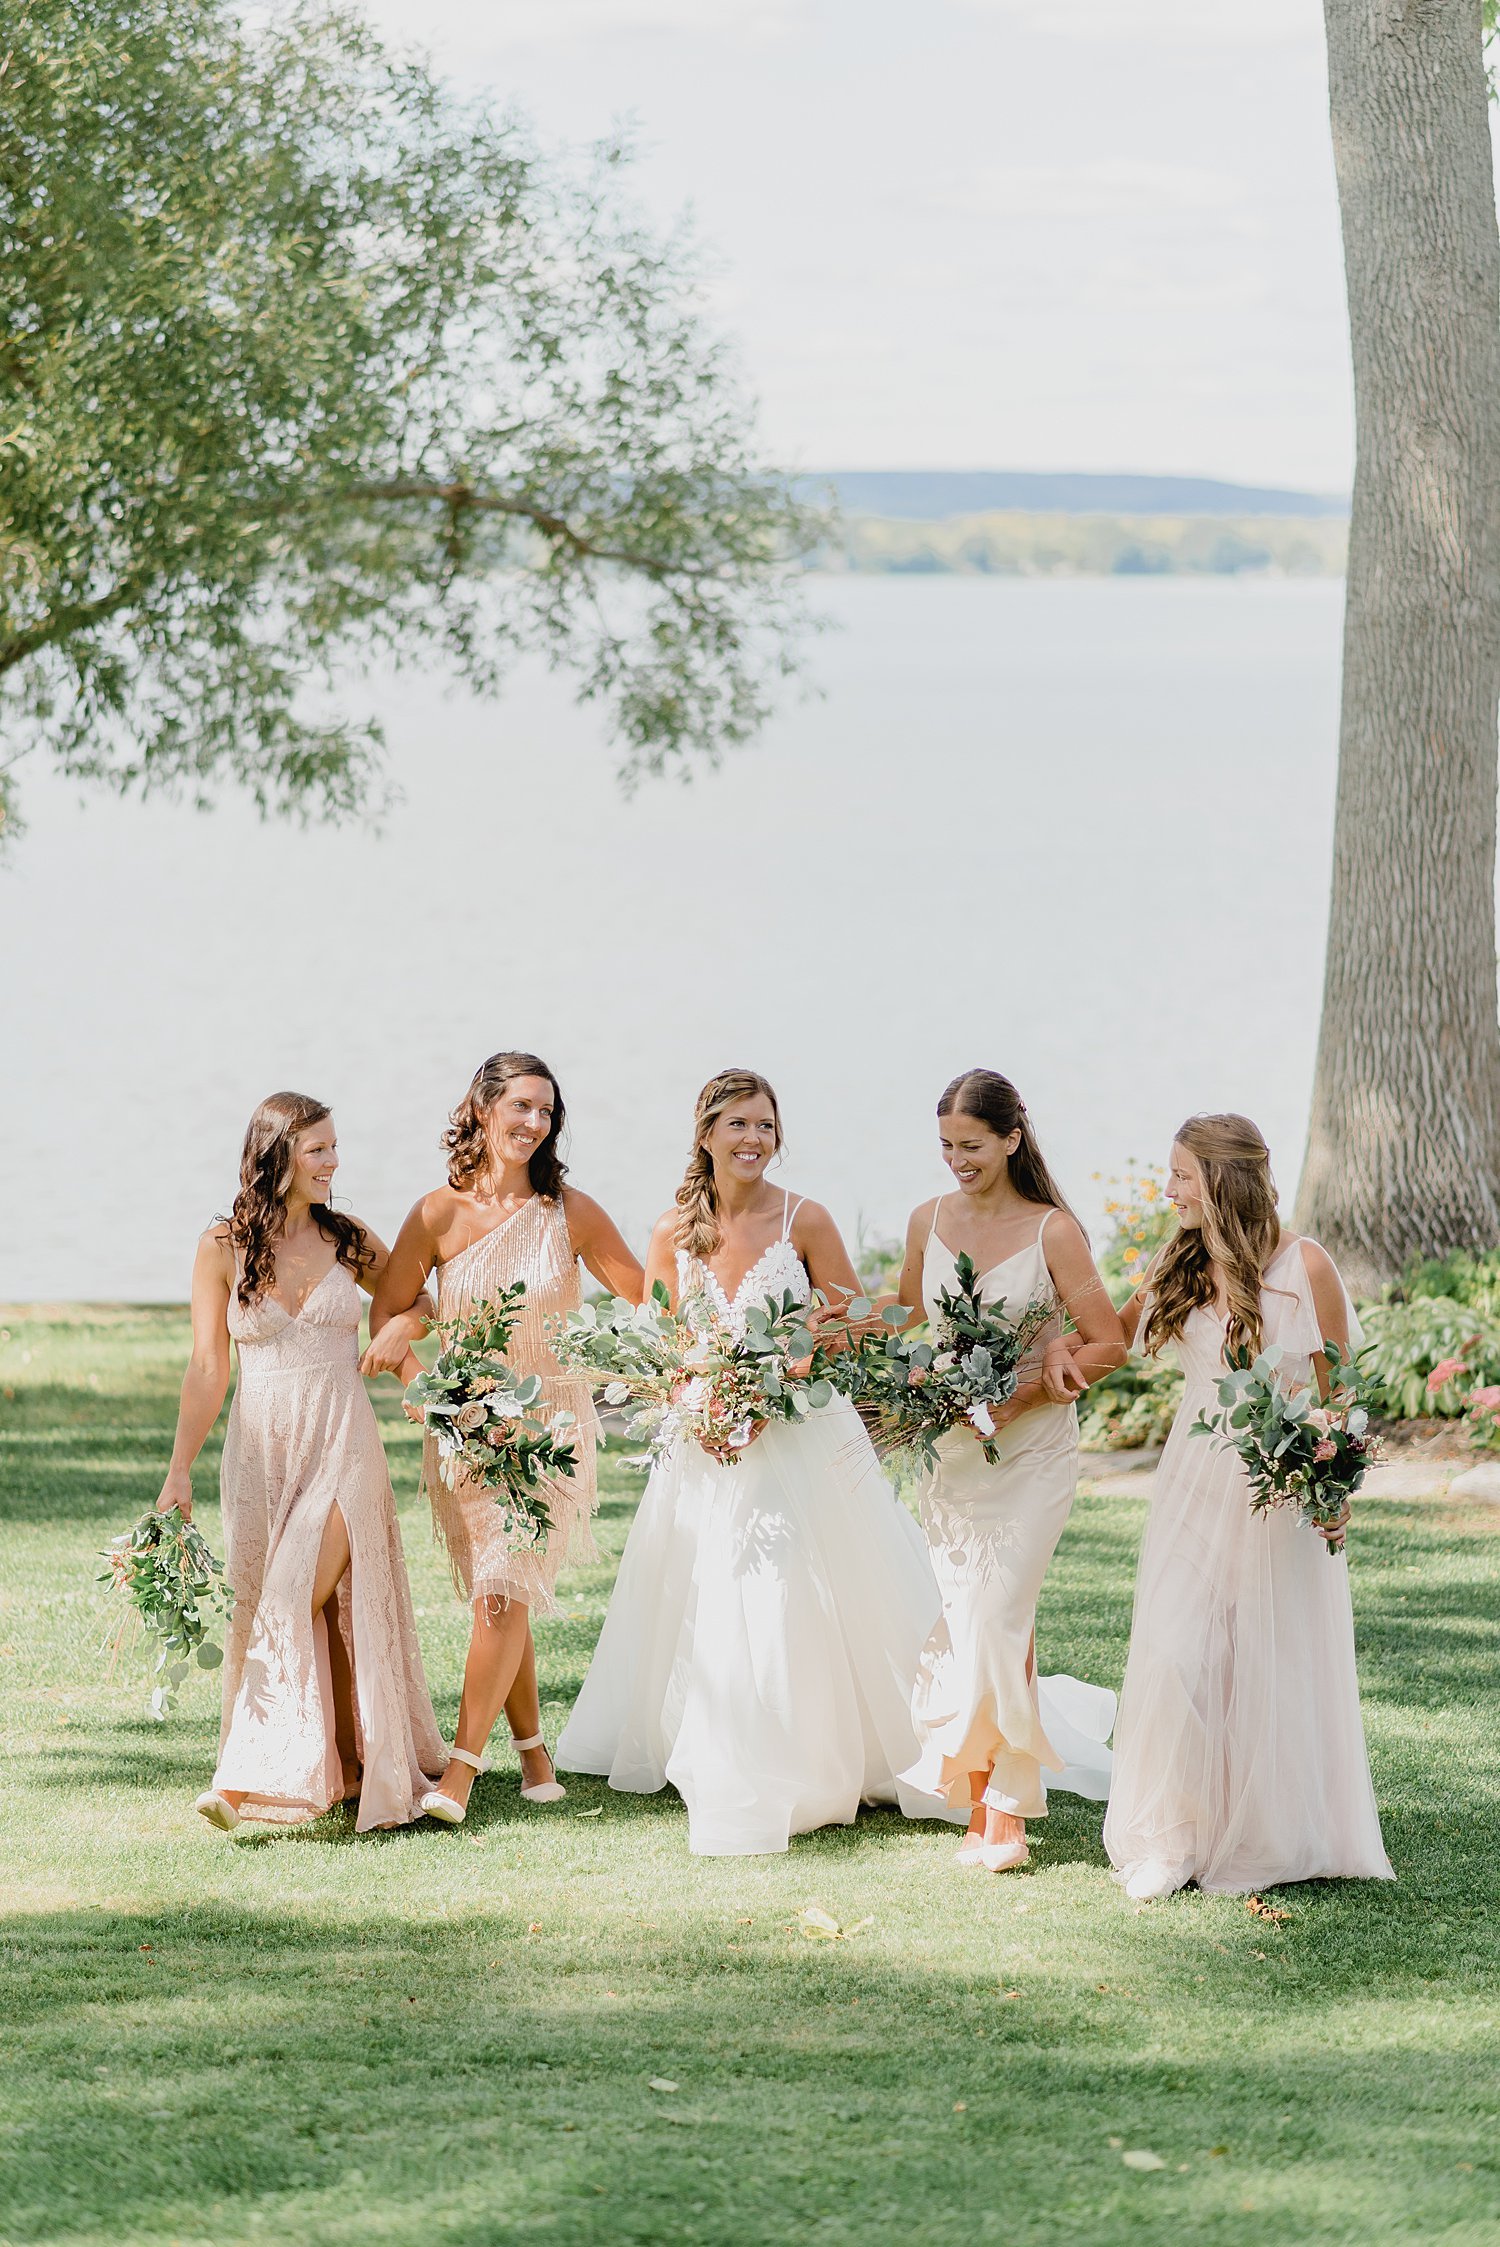 A Royal Canadian Mountie's Intimate Summer Wedding in Prince Edward County | Prince Edward County Wedding Photographer | Holly McMurter Photographs_0019.jpg